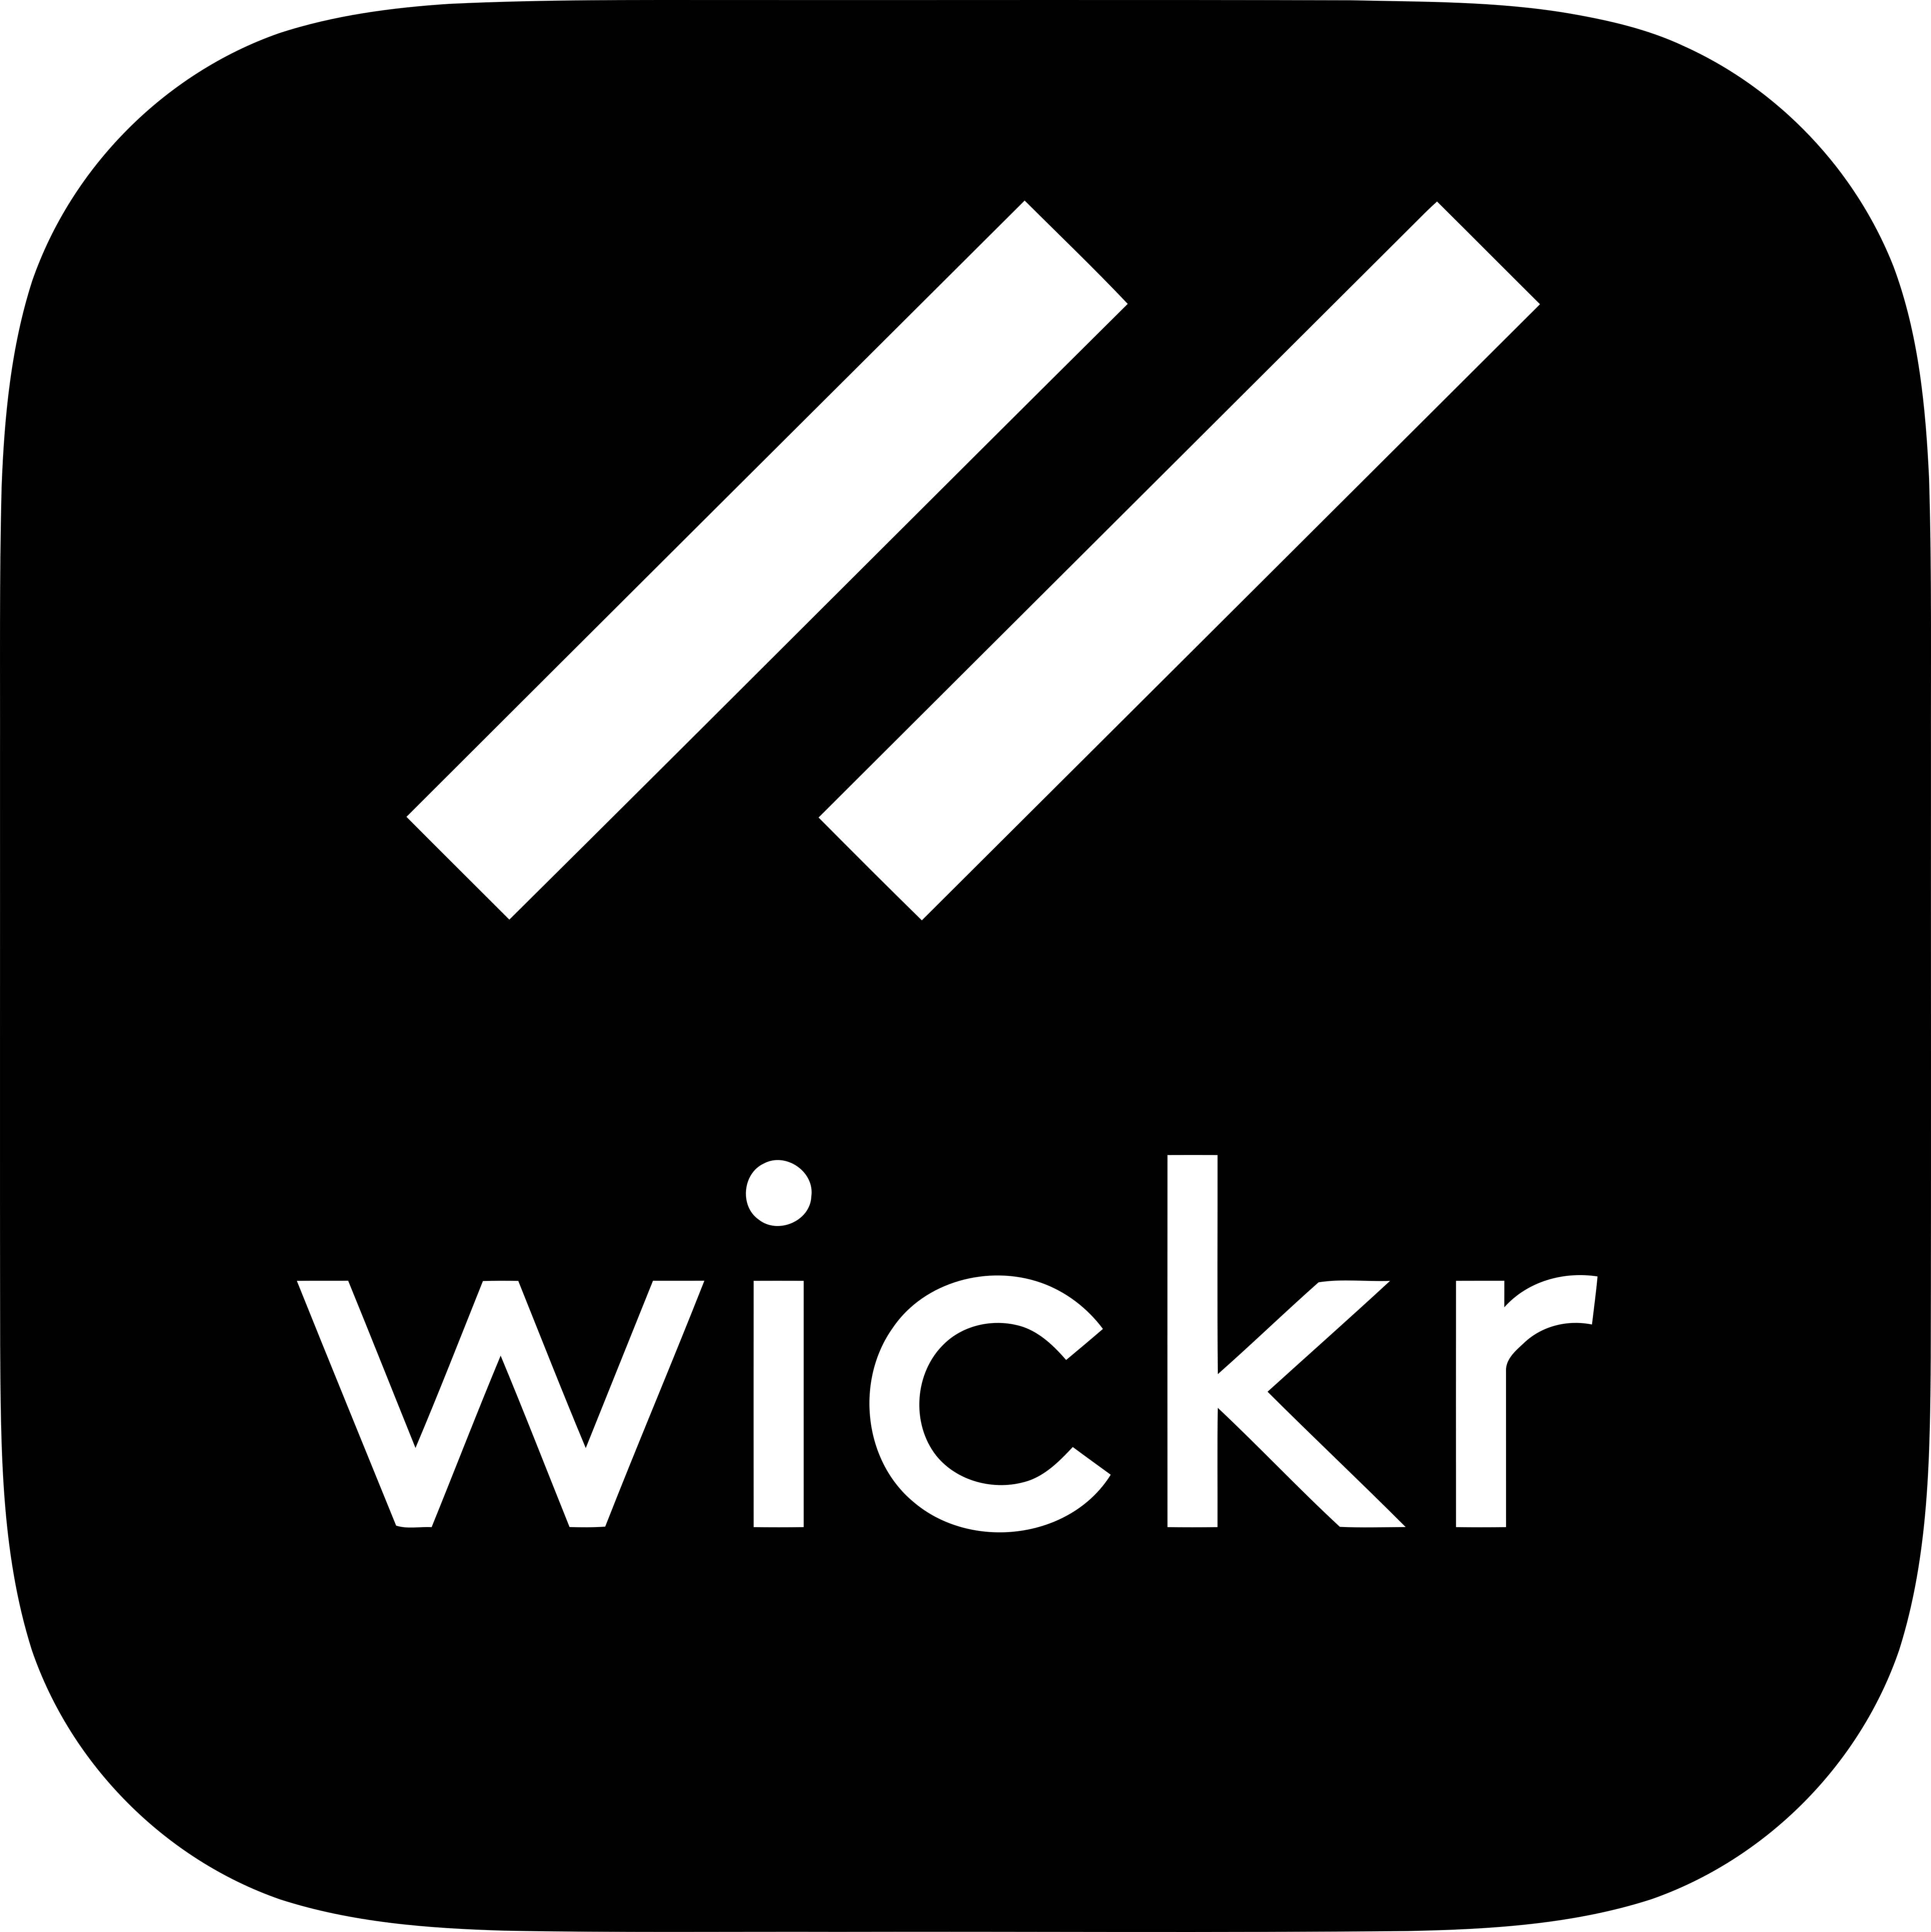 wickr download